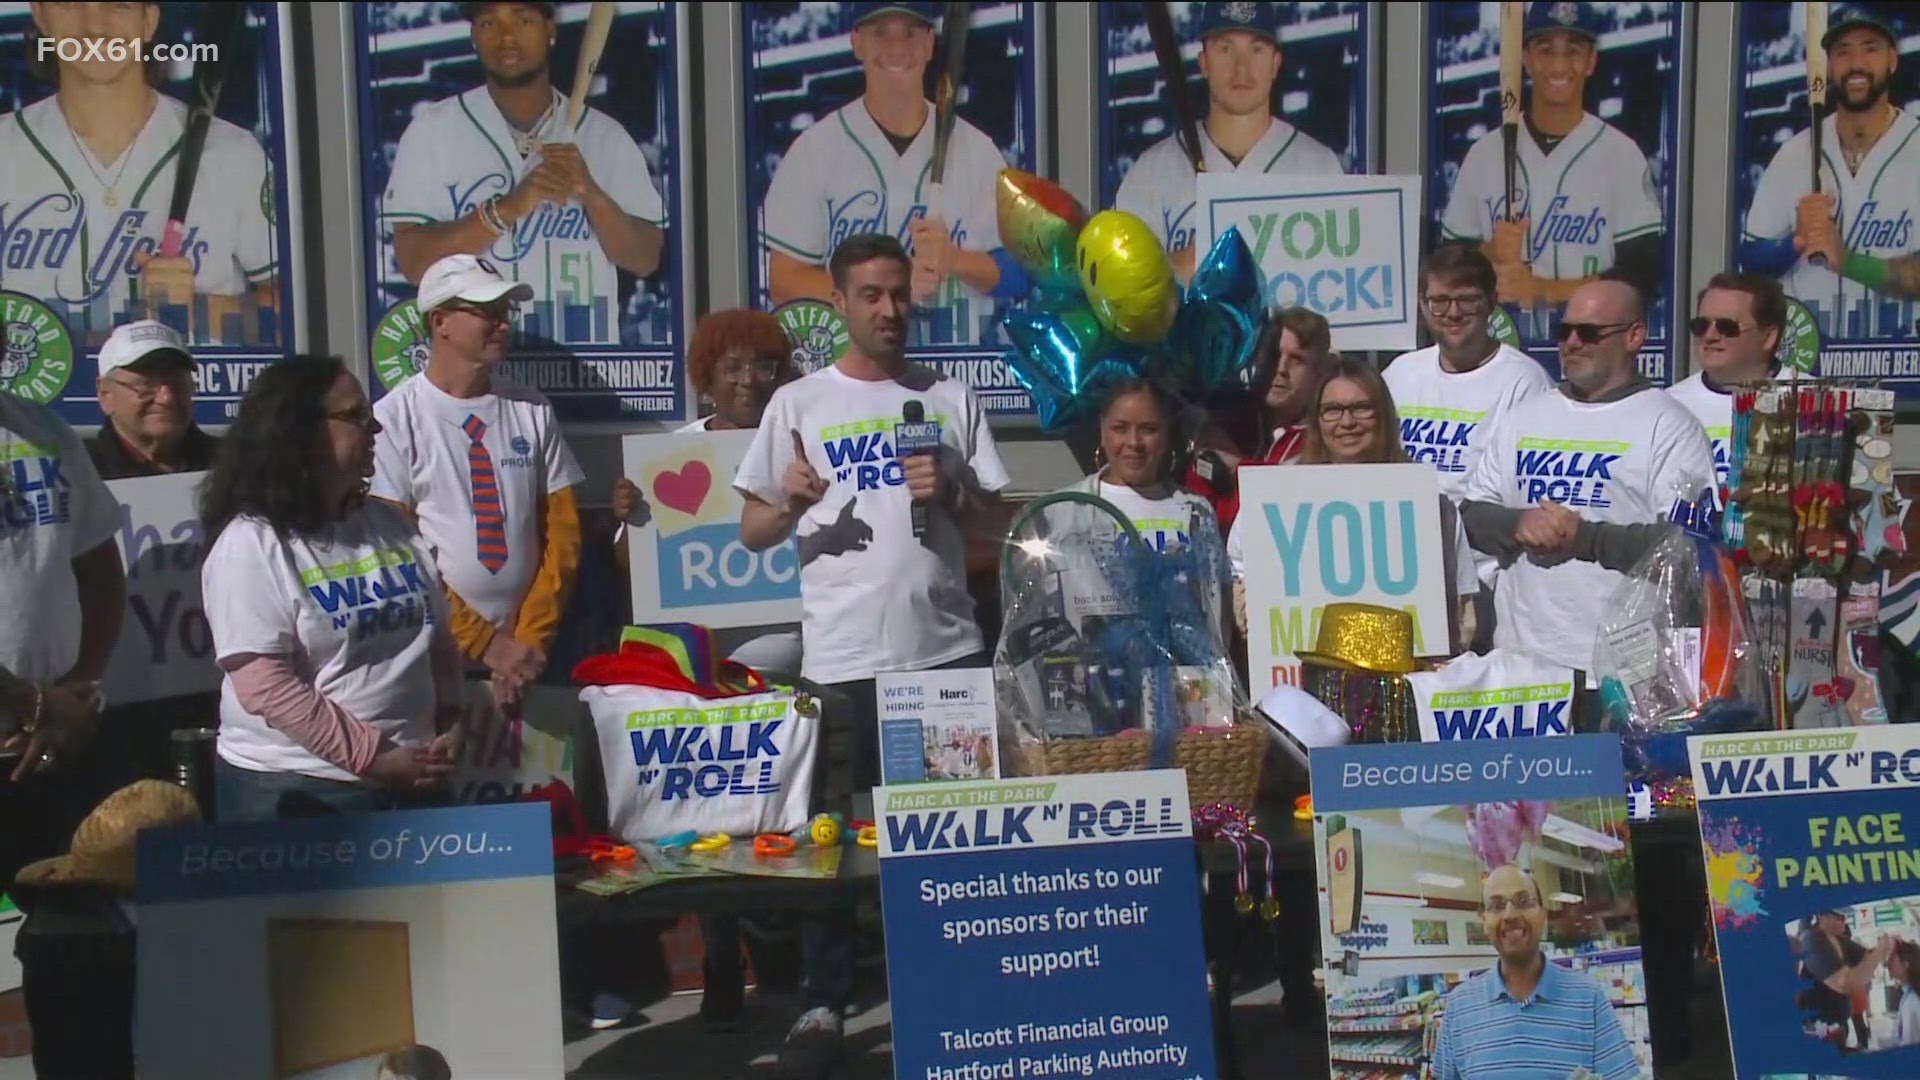 The HARC Walk N' Roll to celebrate all abilities is happening at Dunkin' Park in Hartford.